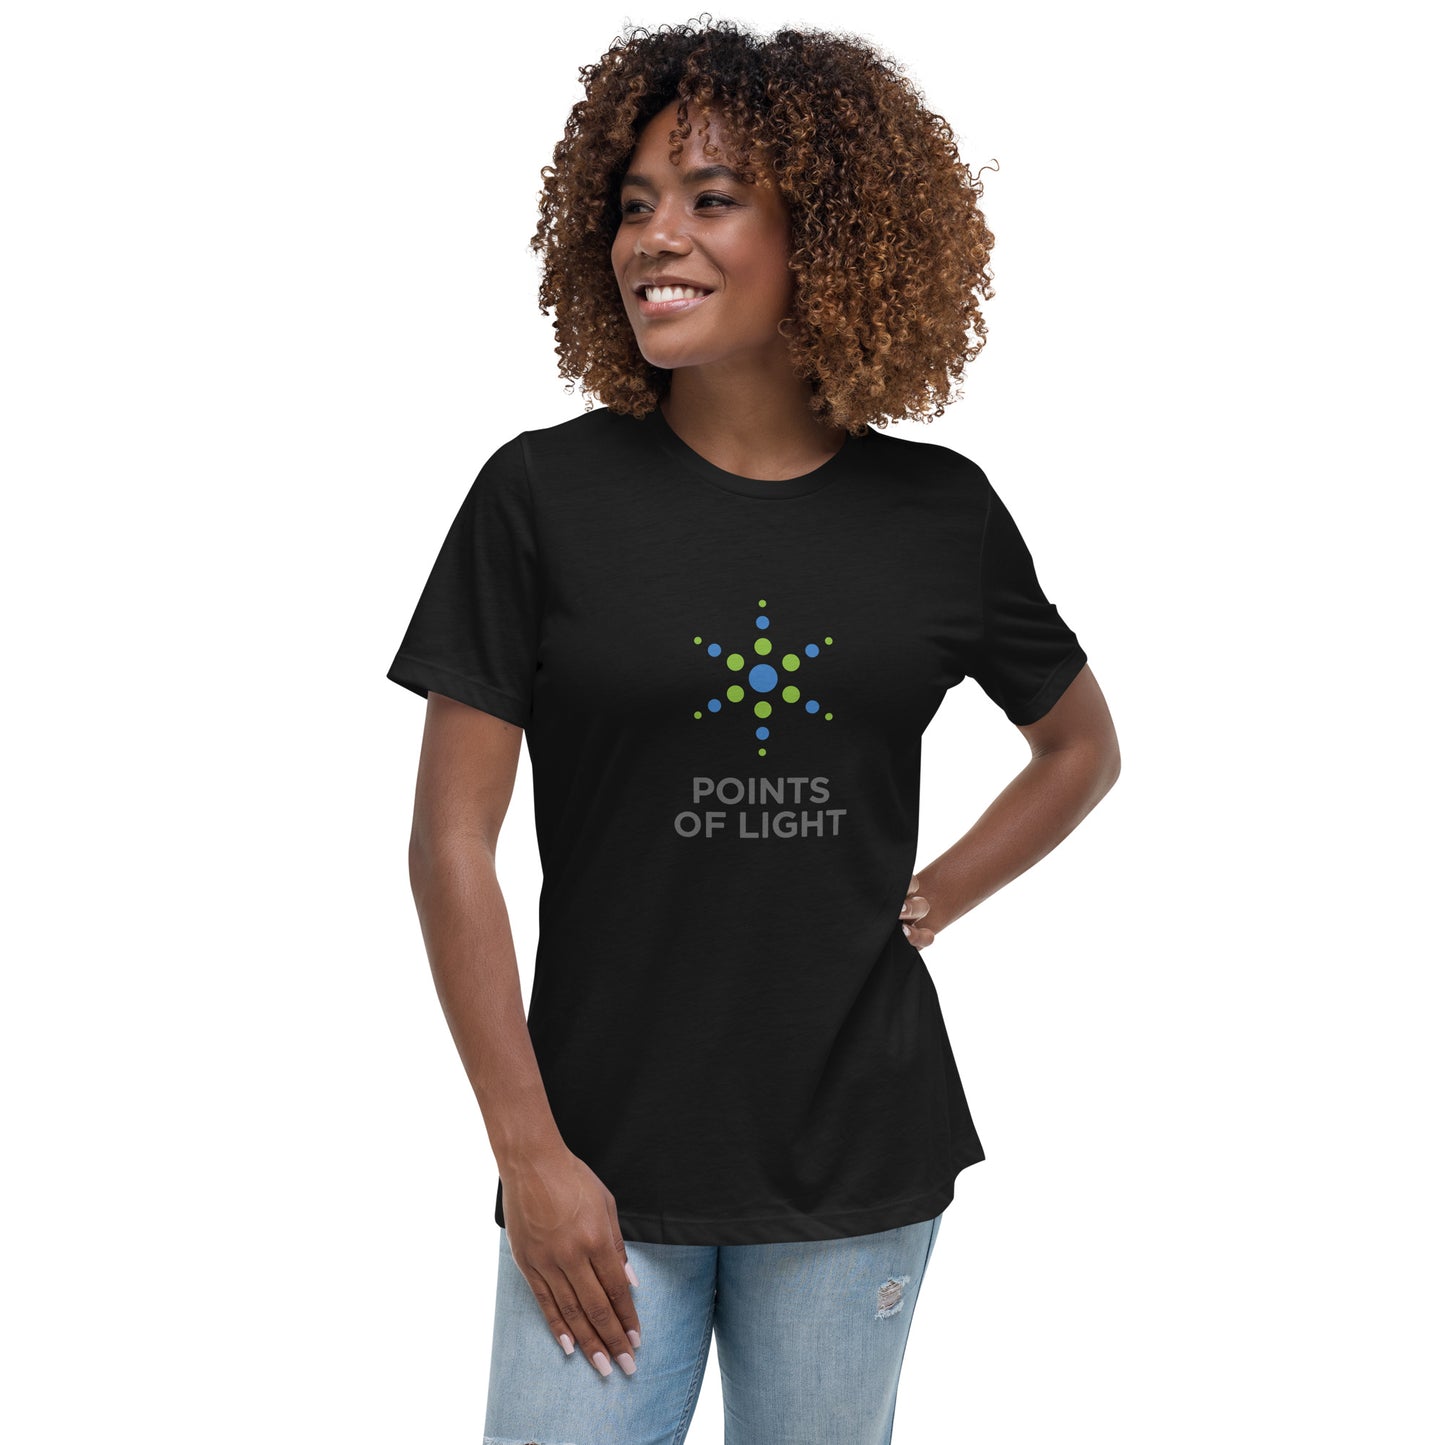 Points of Light Women's Relaxed T-Shirt